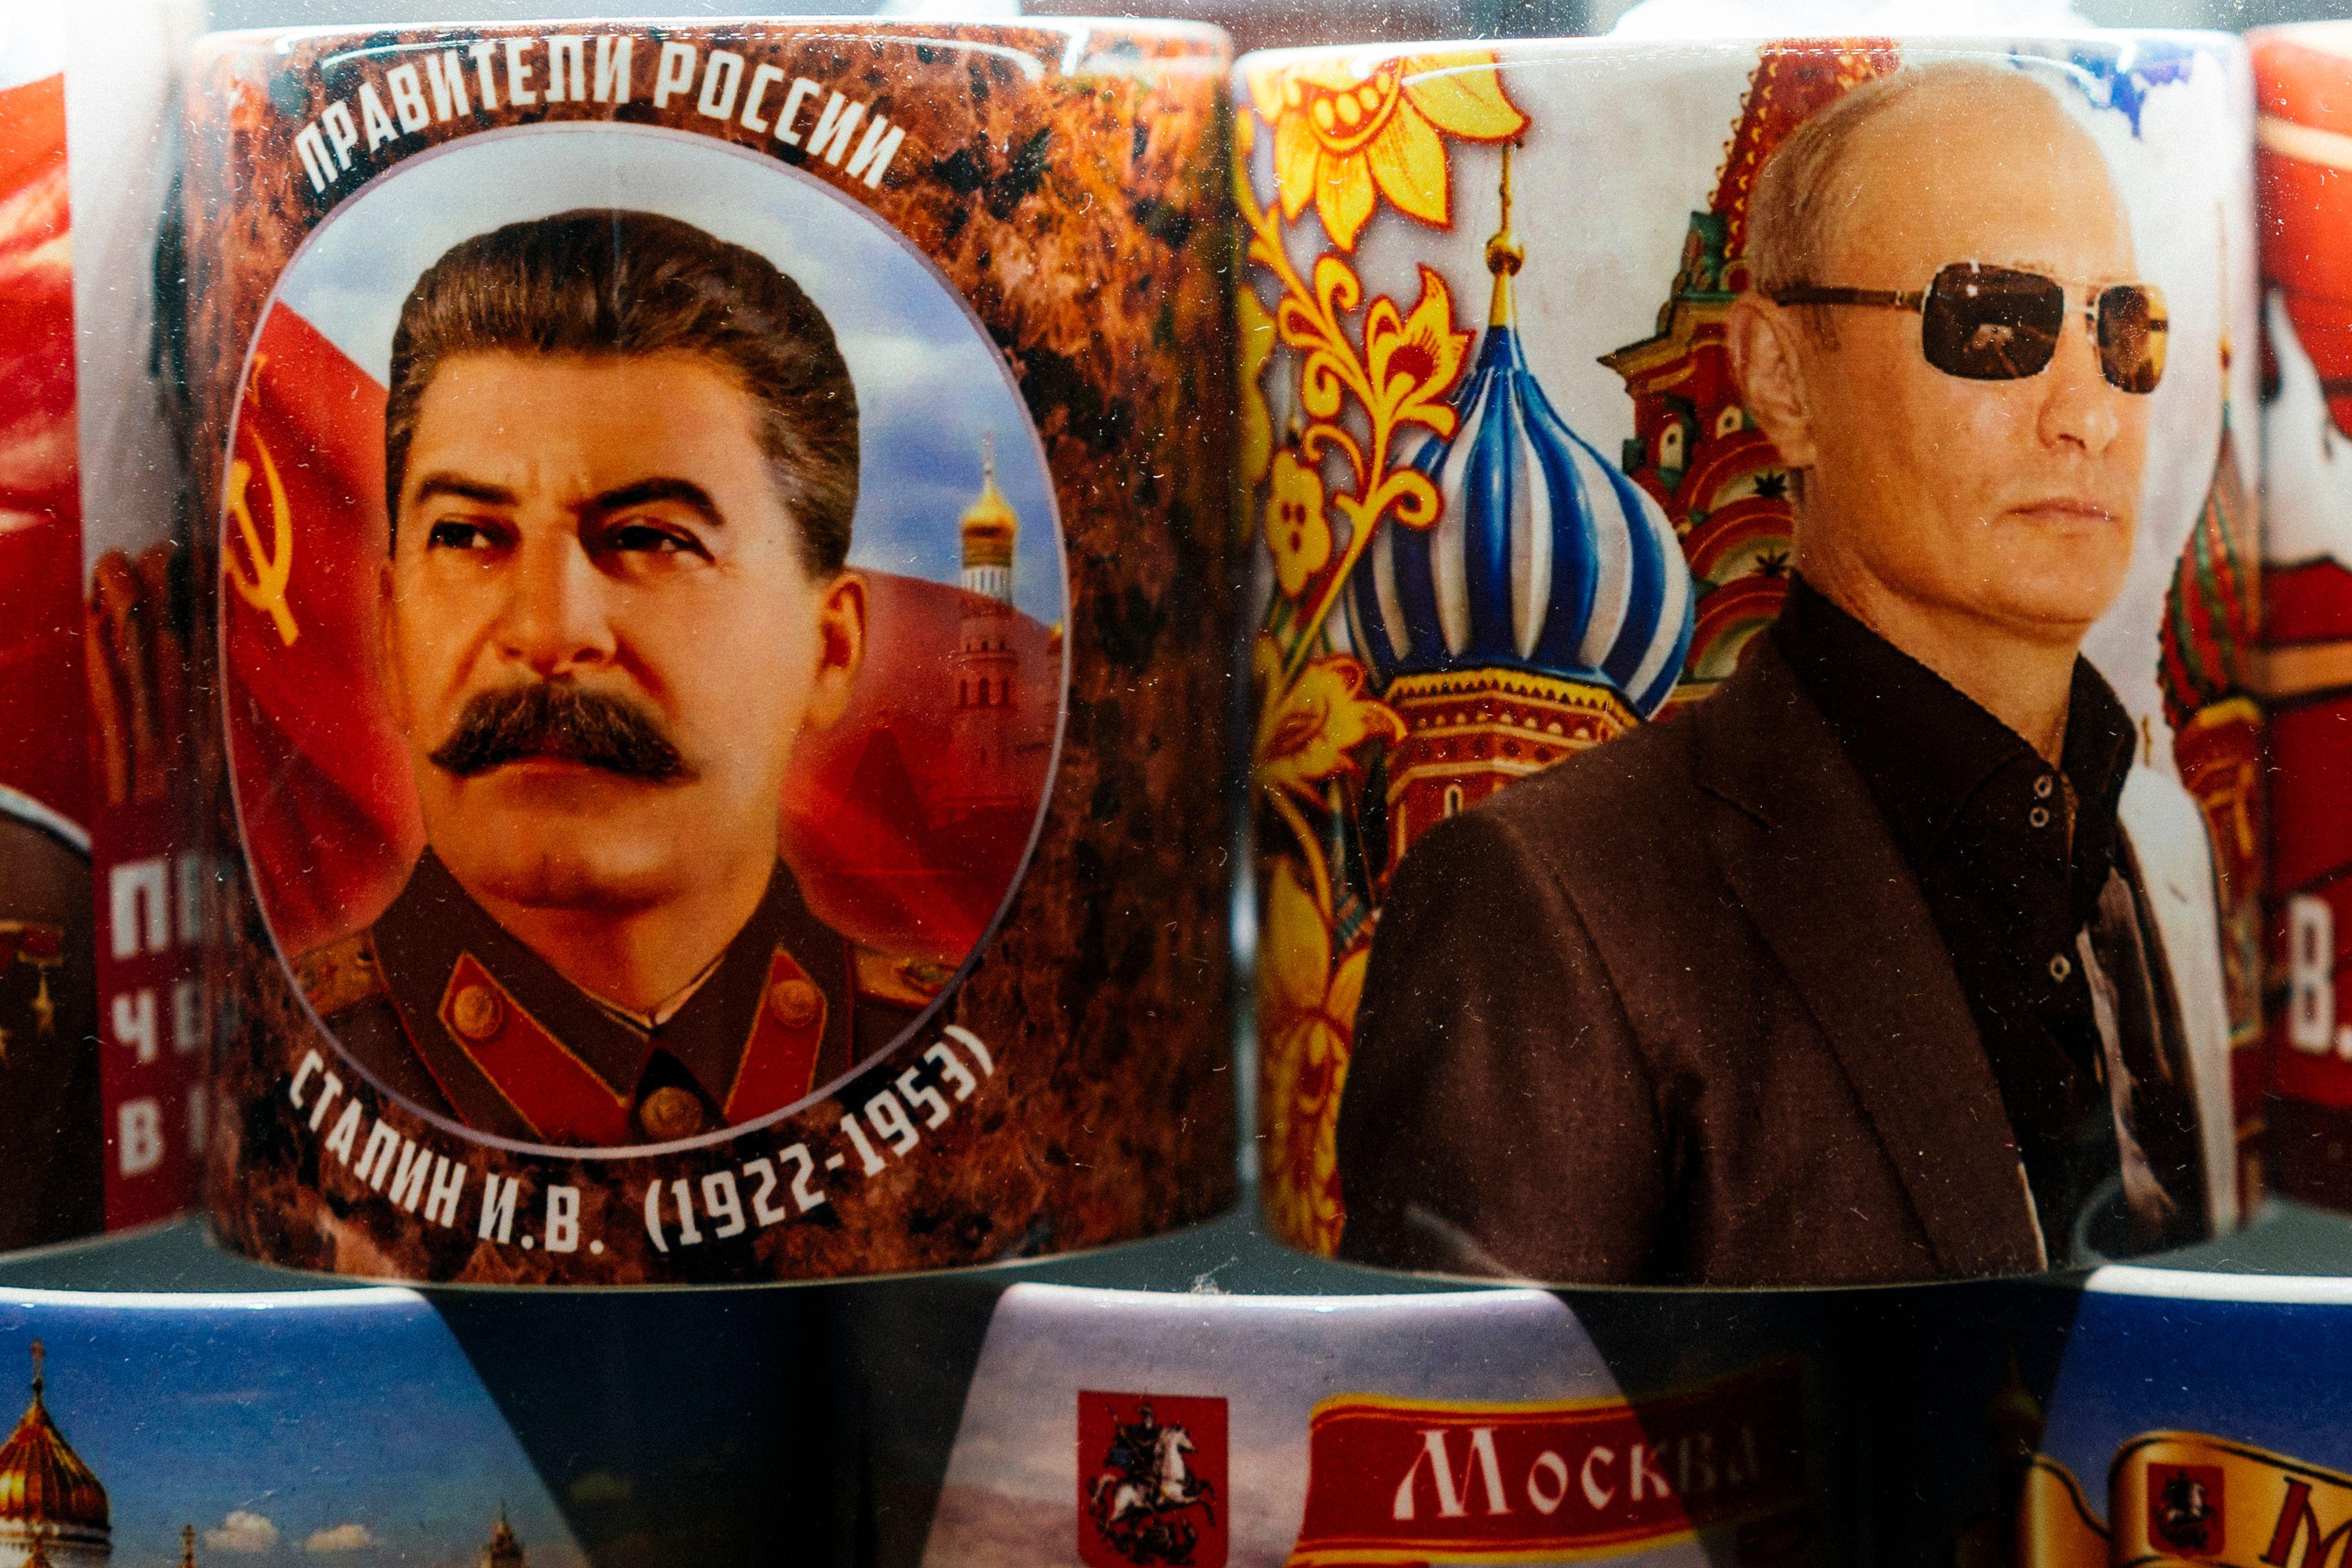 Mugs decorated with images of Stalin and Putin stacked on a shelf